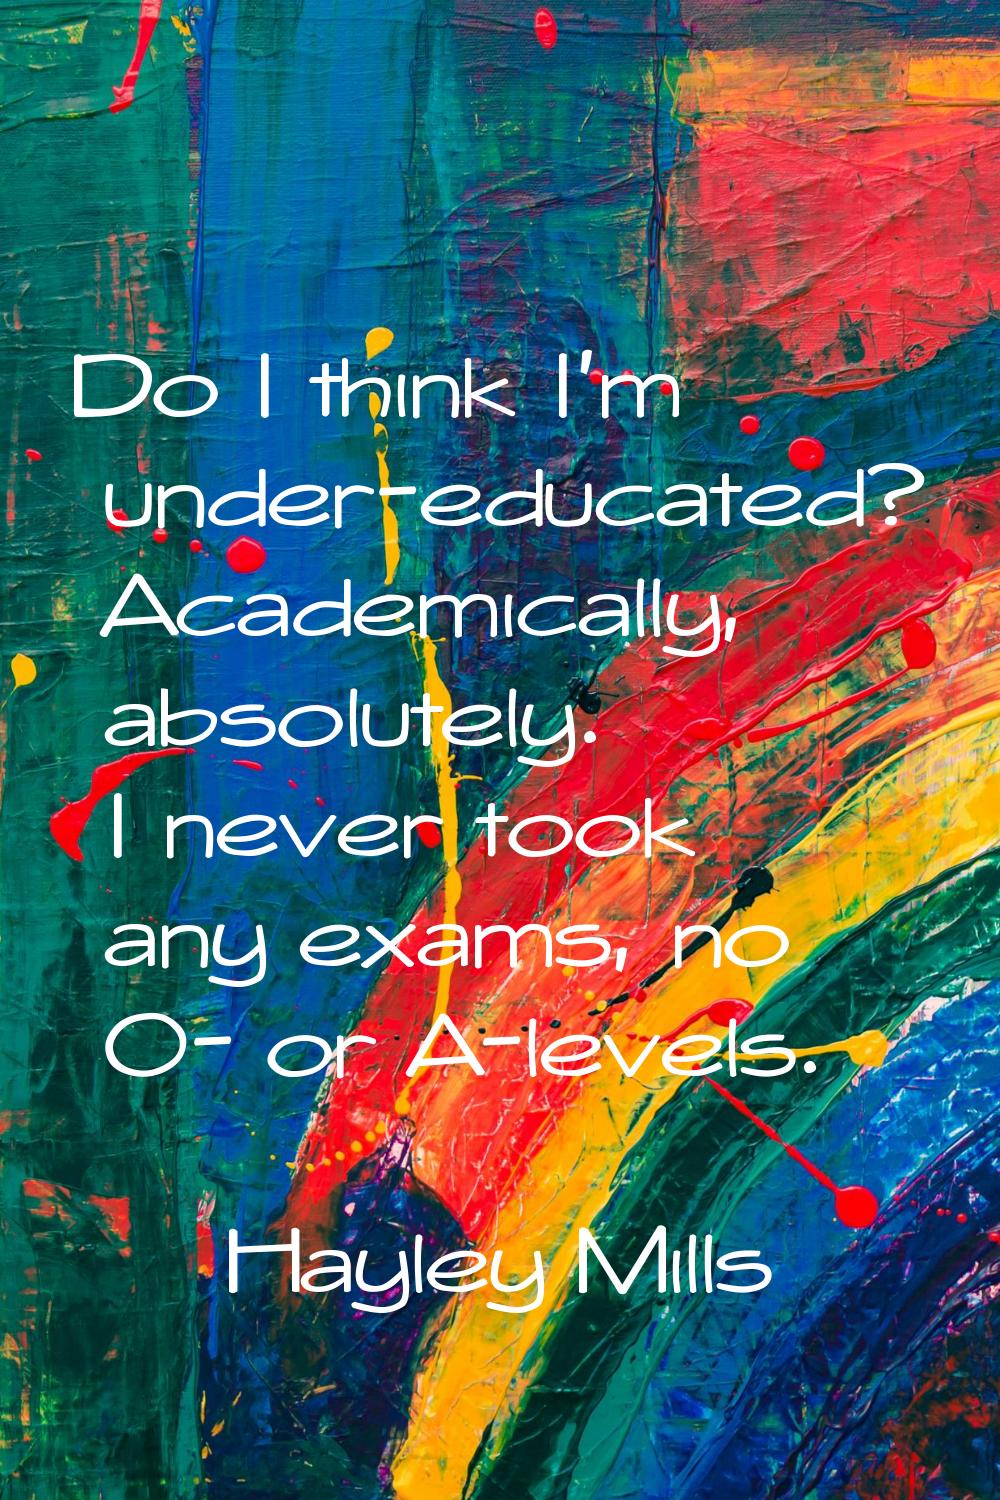 Do I think I'm under-educated? Academically, absolutely. I never took any exams, no O- or A-levels.